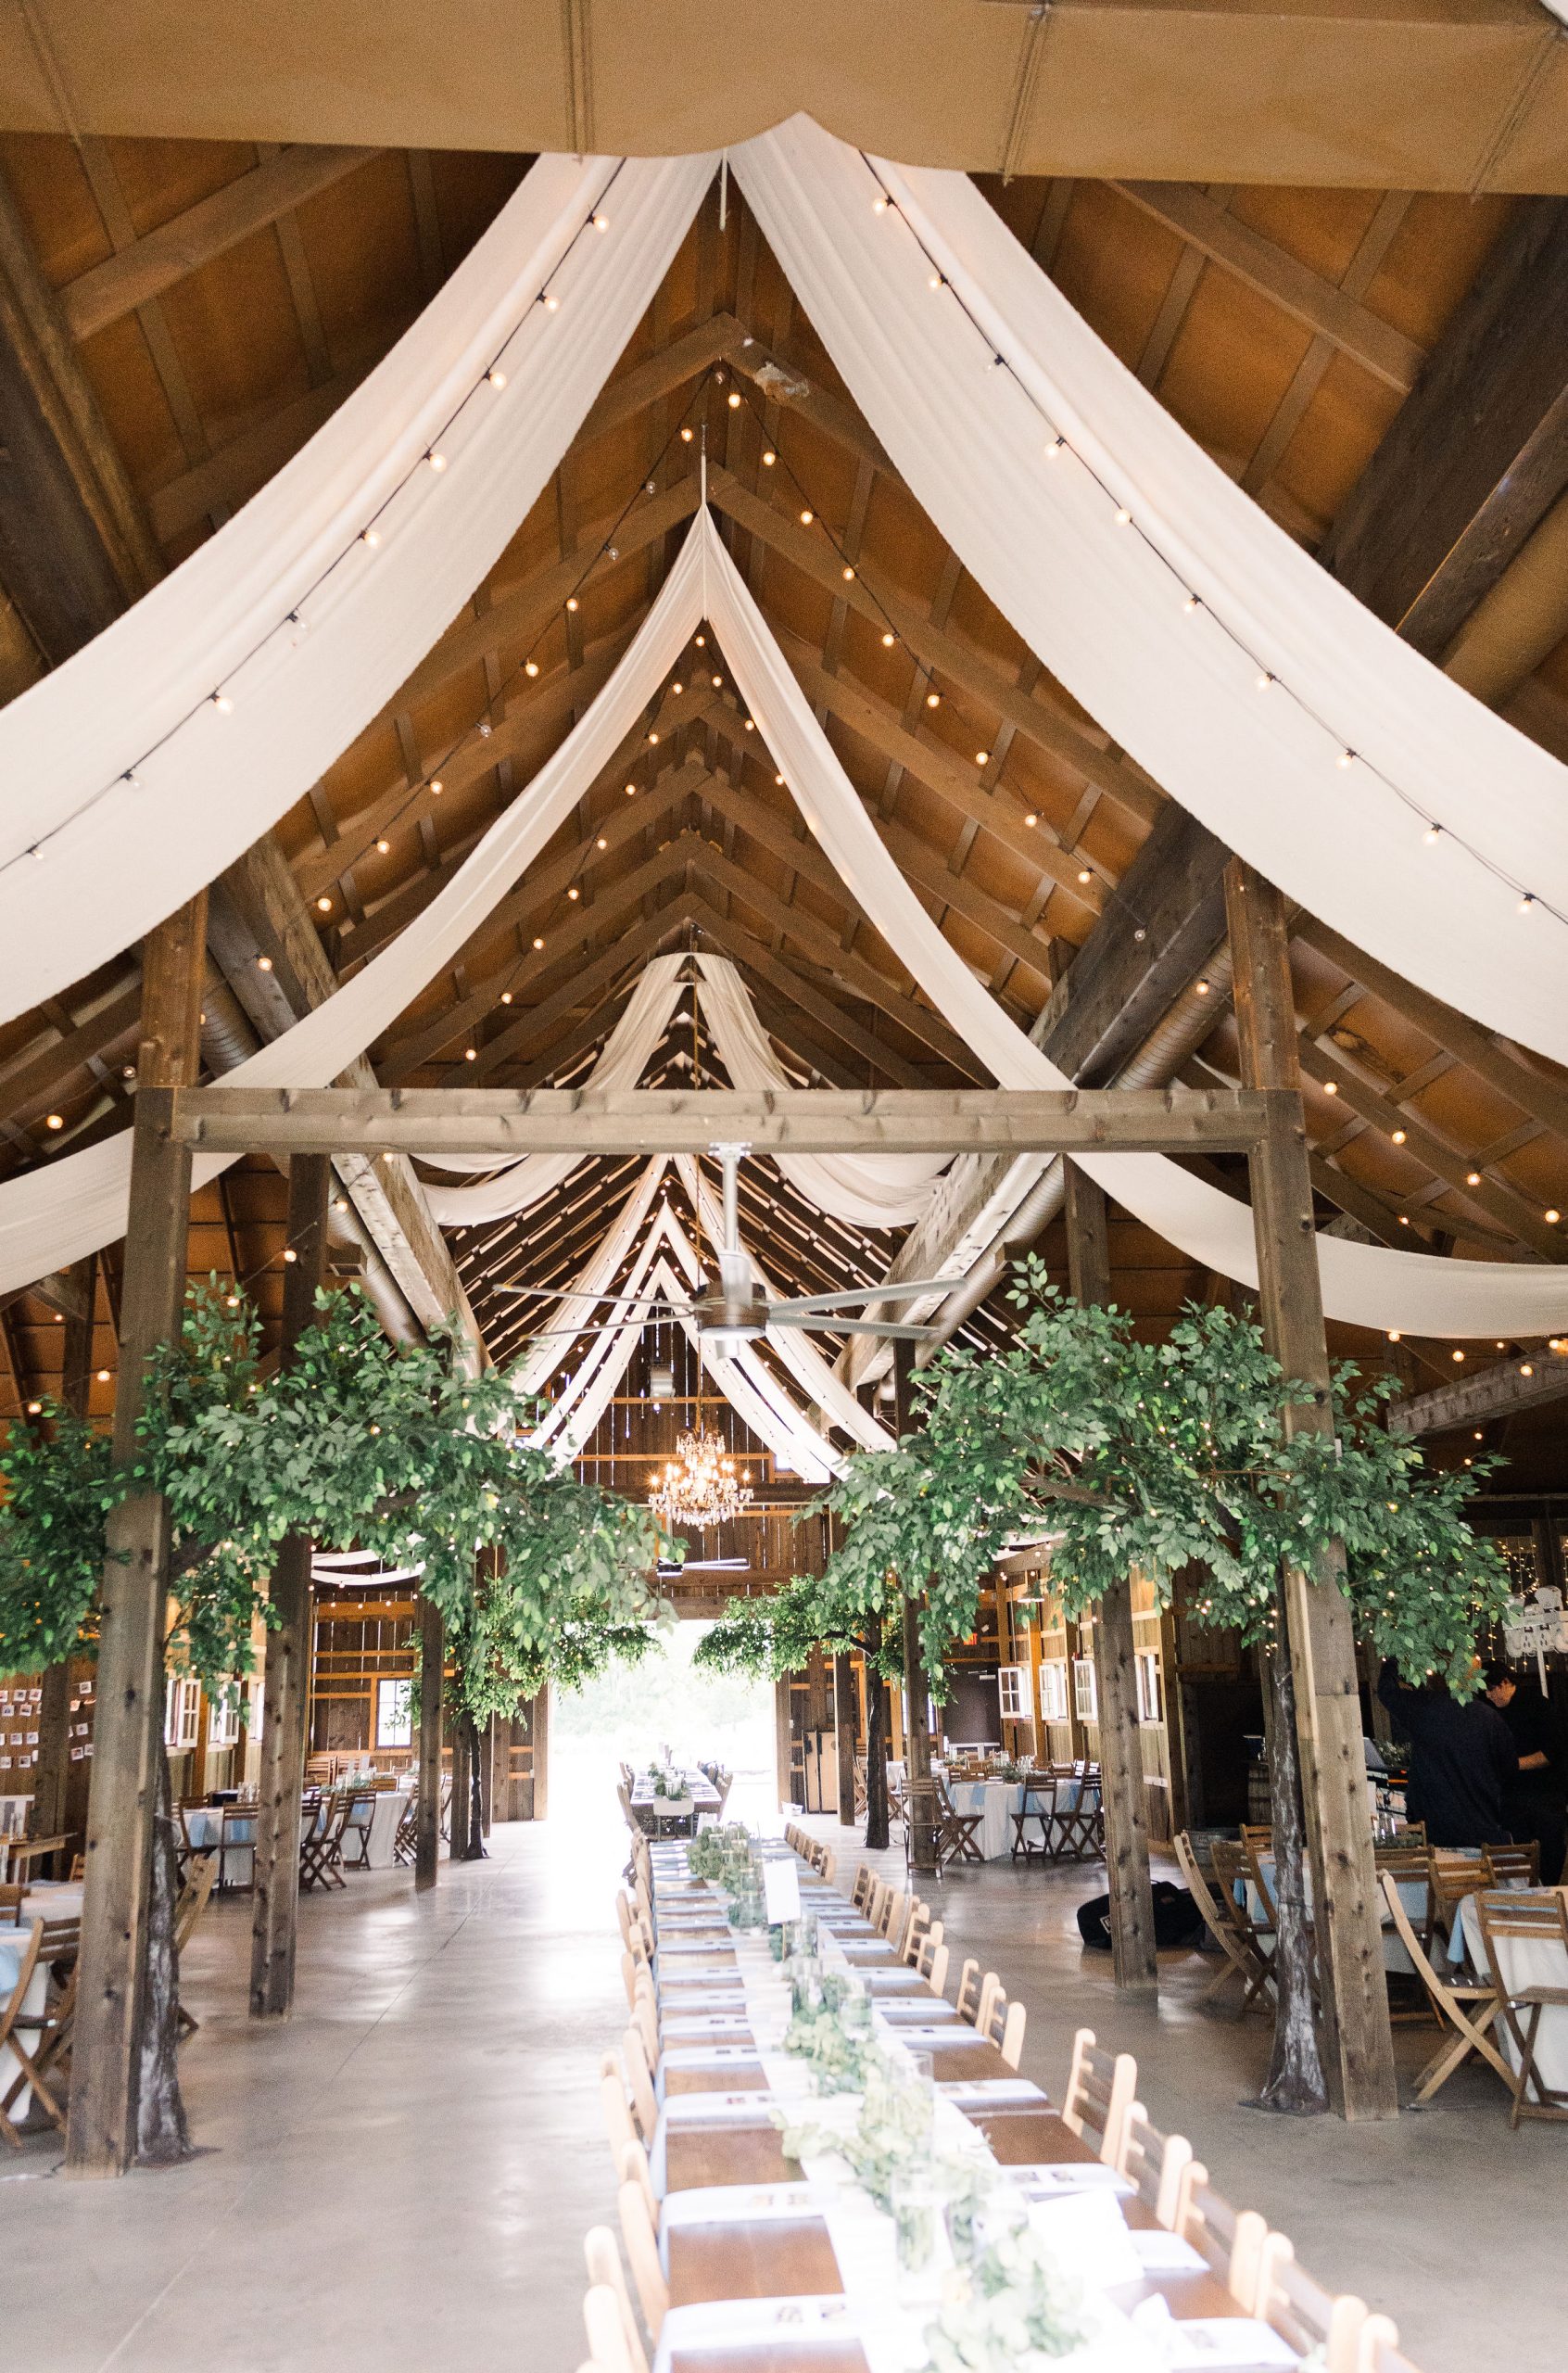 kennedy estate, one of the beautiful wedding barns in indianapolis